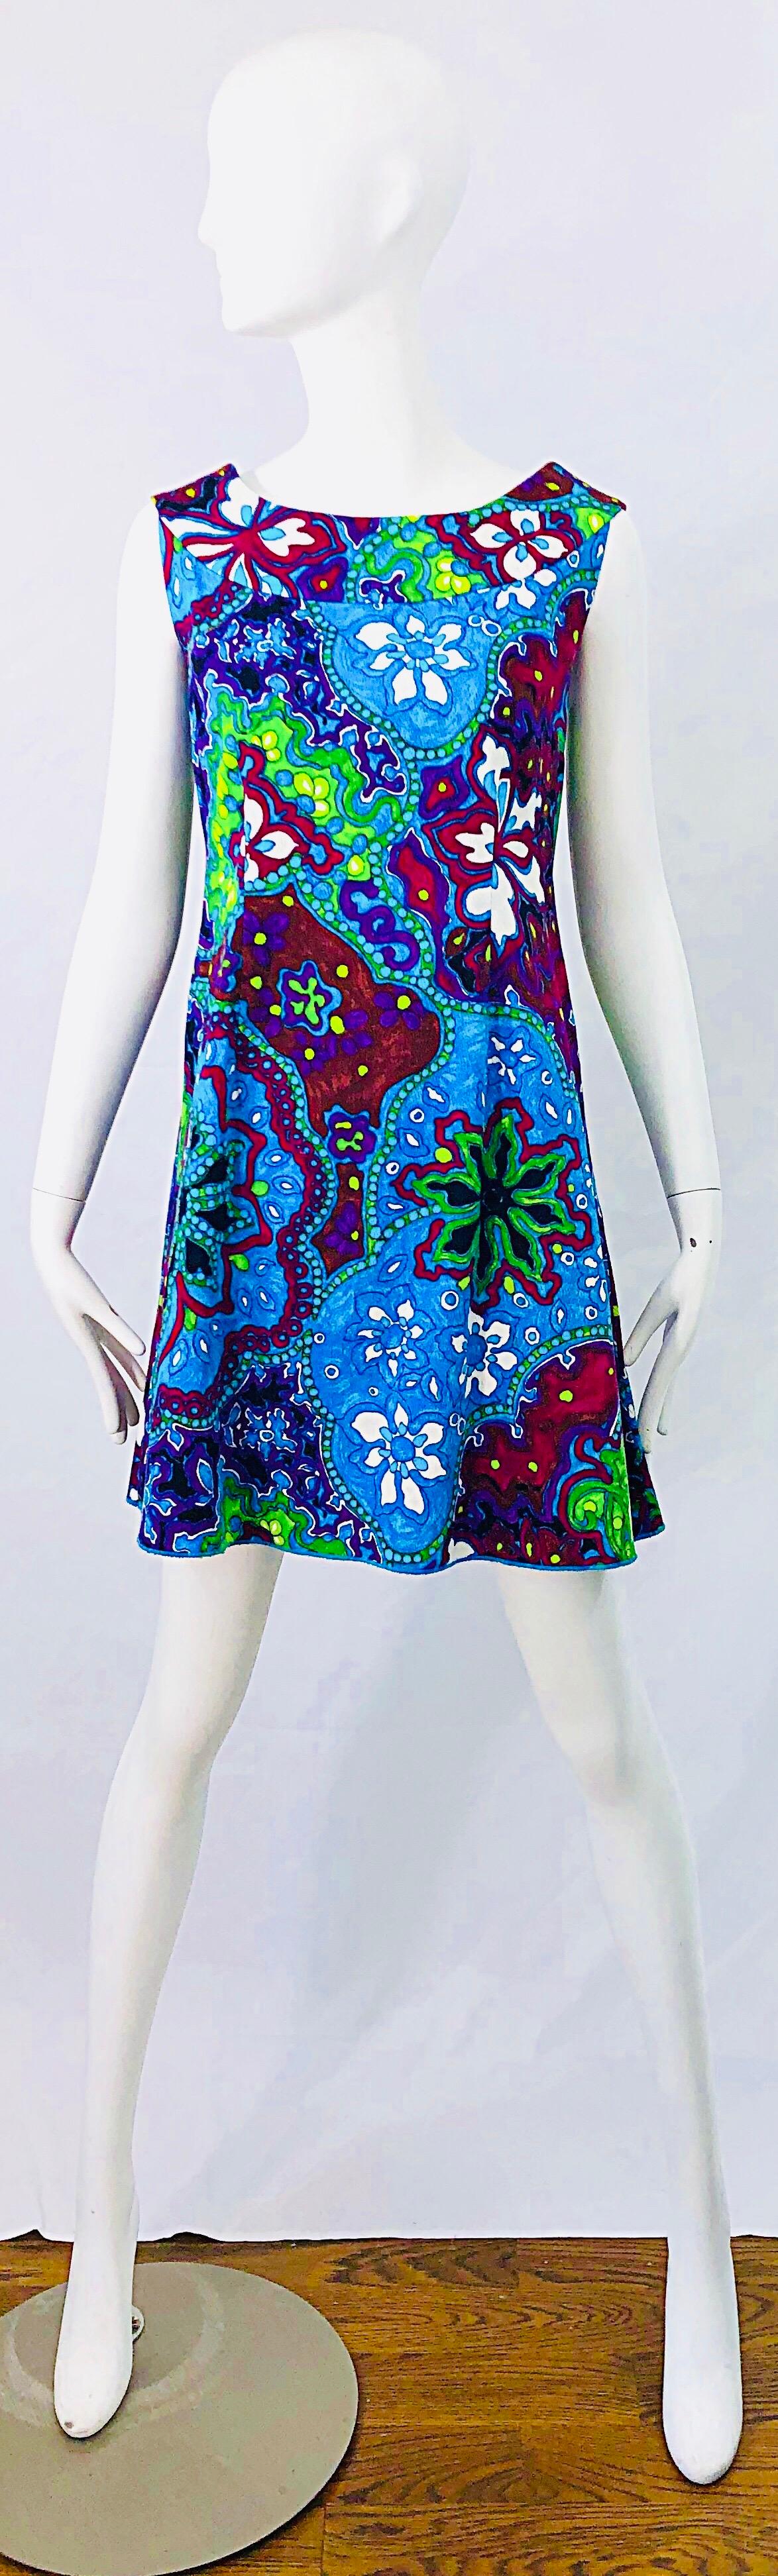 Chic vintage 60s Hawaiian flower print vibrant colored A-Line trapeze mini dress ! Features bright colors of blue, turquoise, purple, burgundy, red and white throghout. Higher front neck that dips in the back. Hidden zipper up the back with